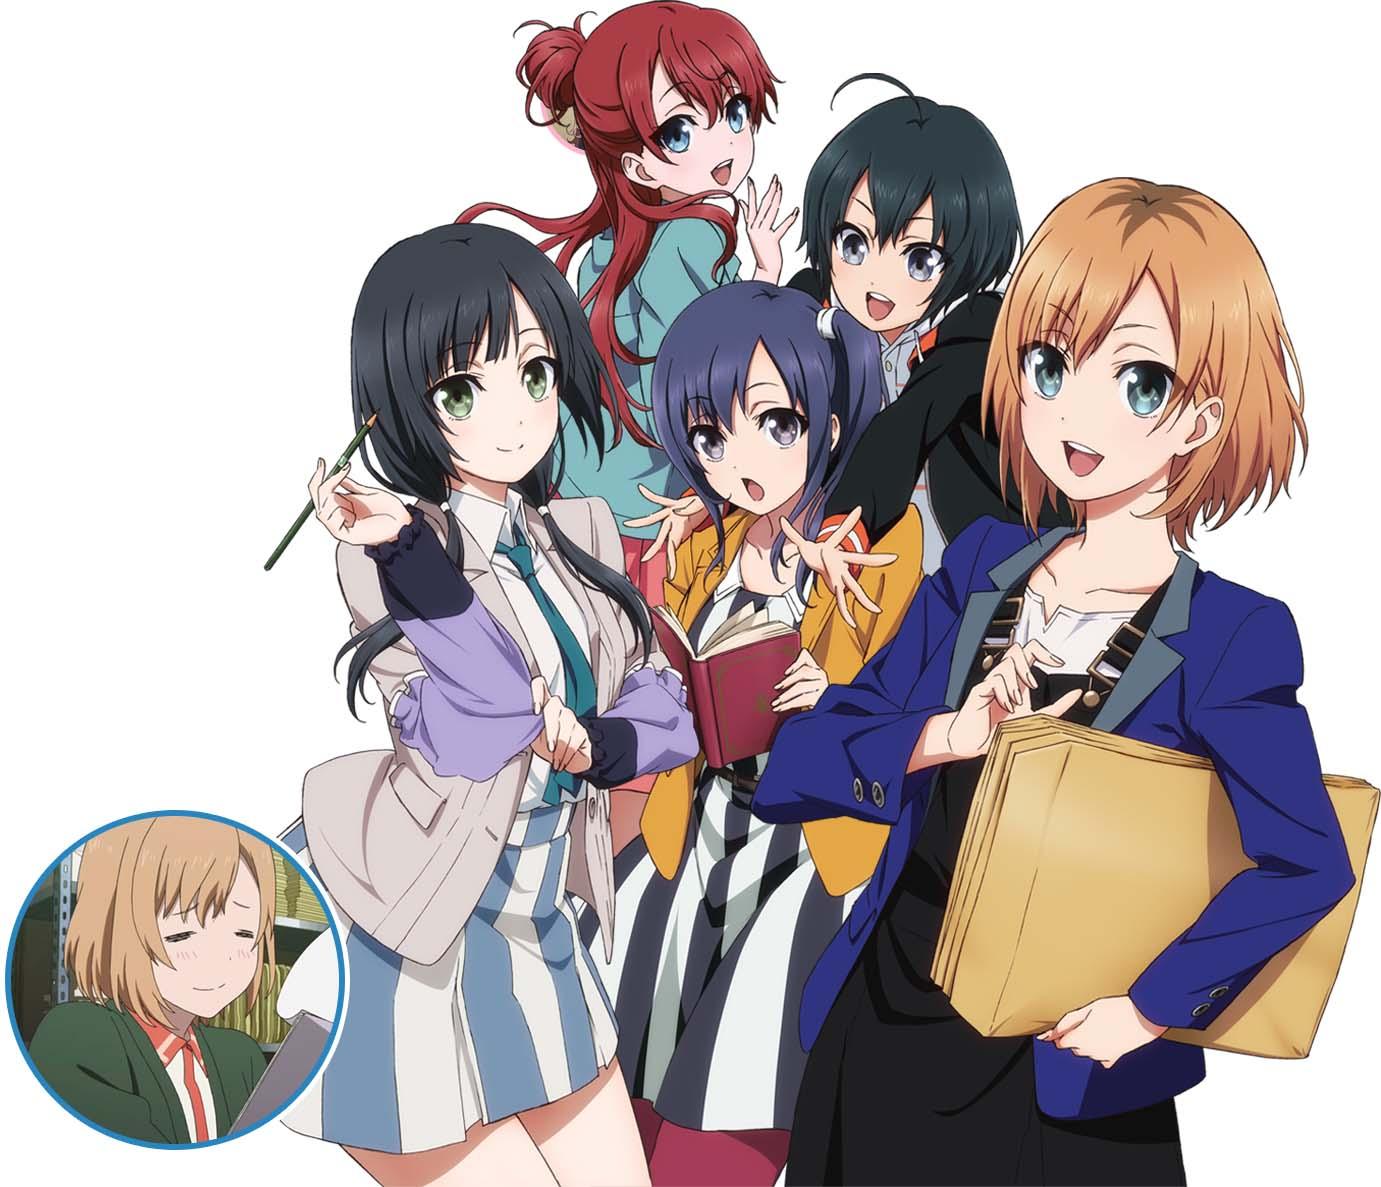 Love All Play - The Spring 2022 Preview Guide - Anime News Network